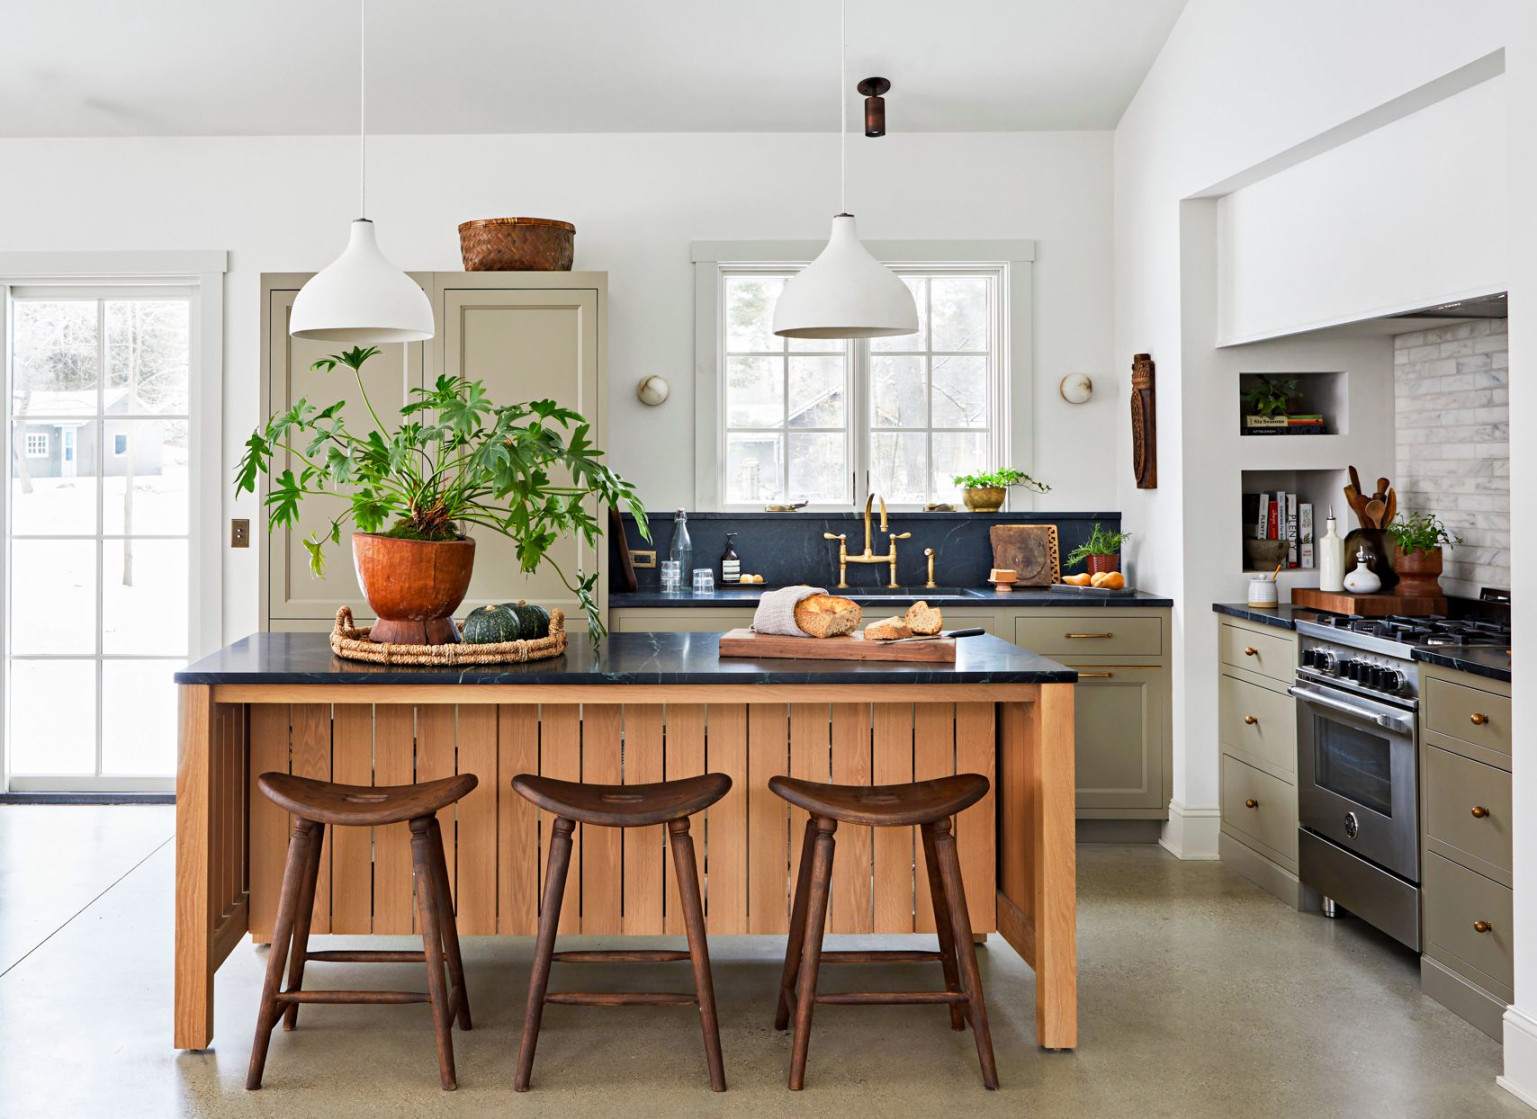 Designers Predict the Top Kitchen Trends for